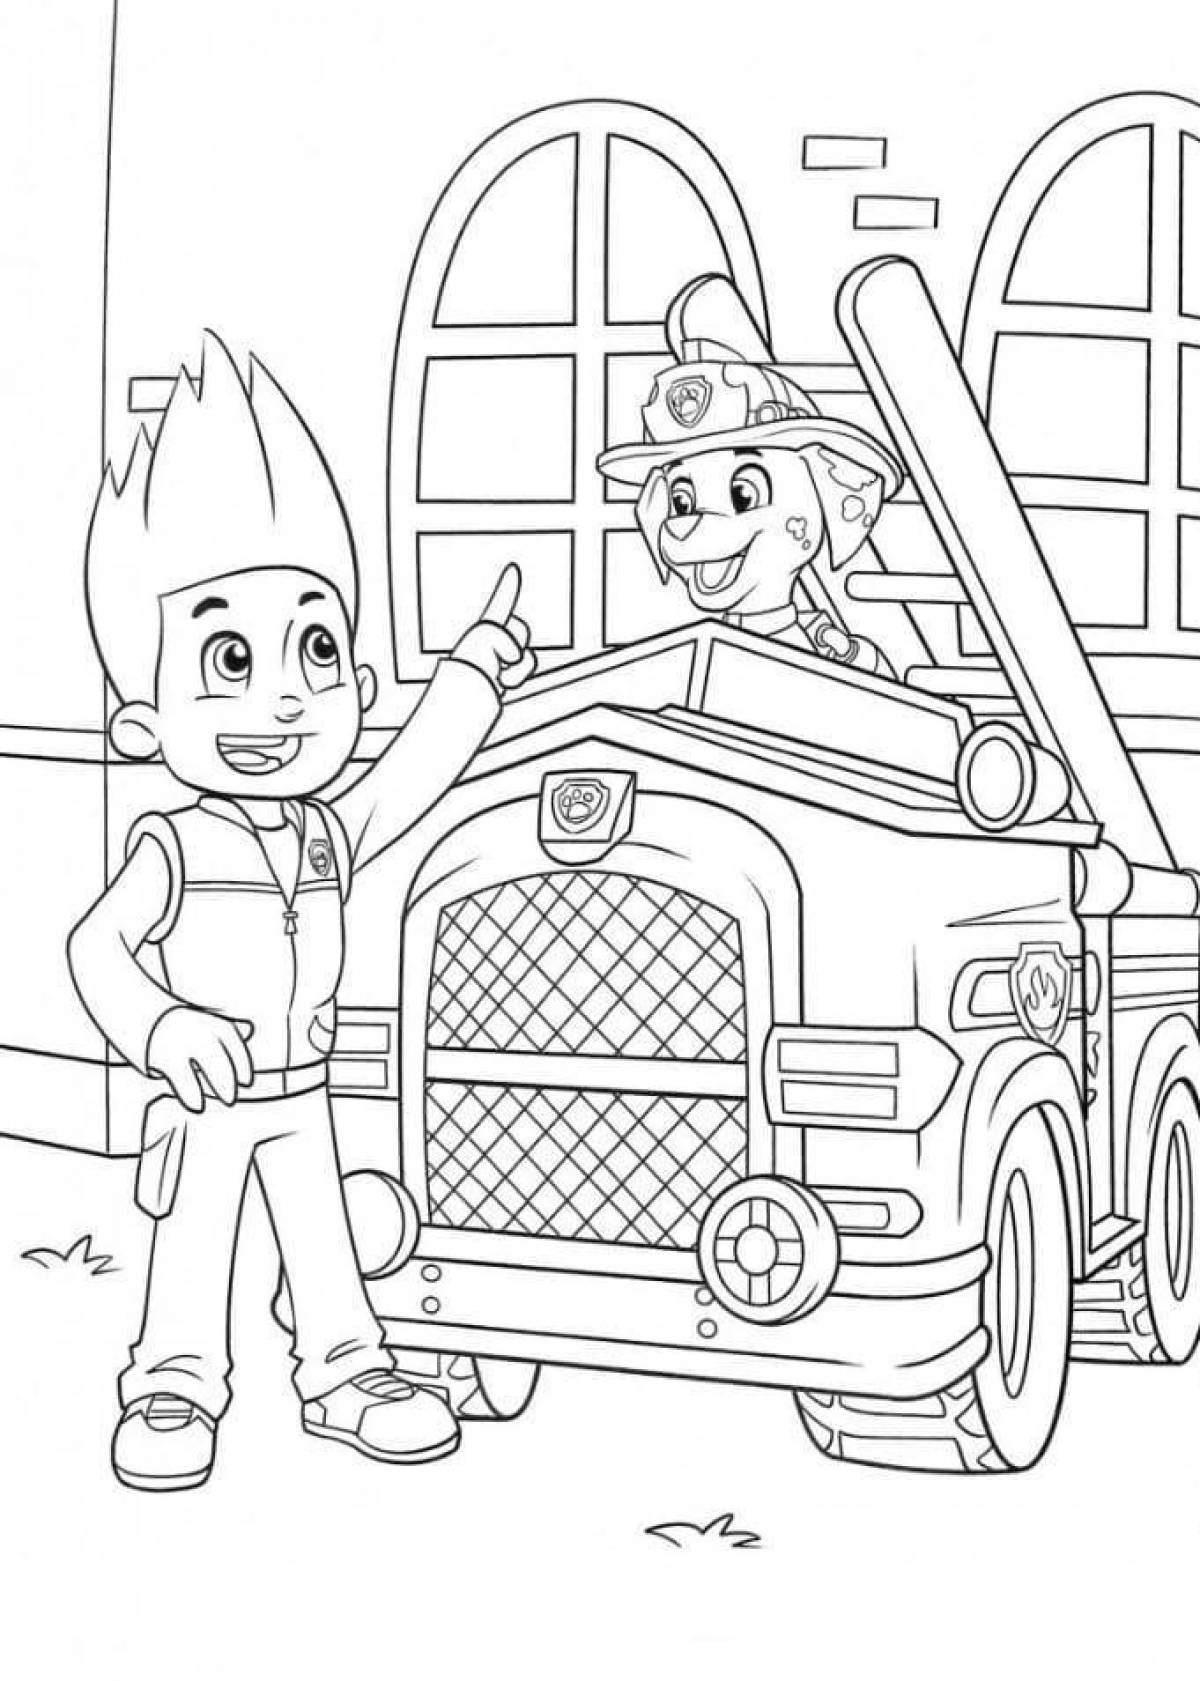 Coloring page funny rider